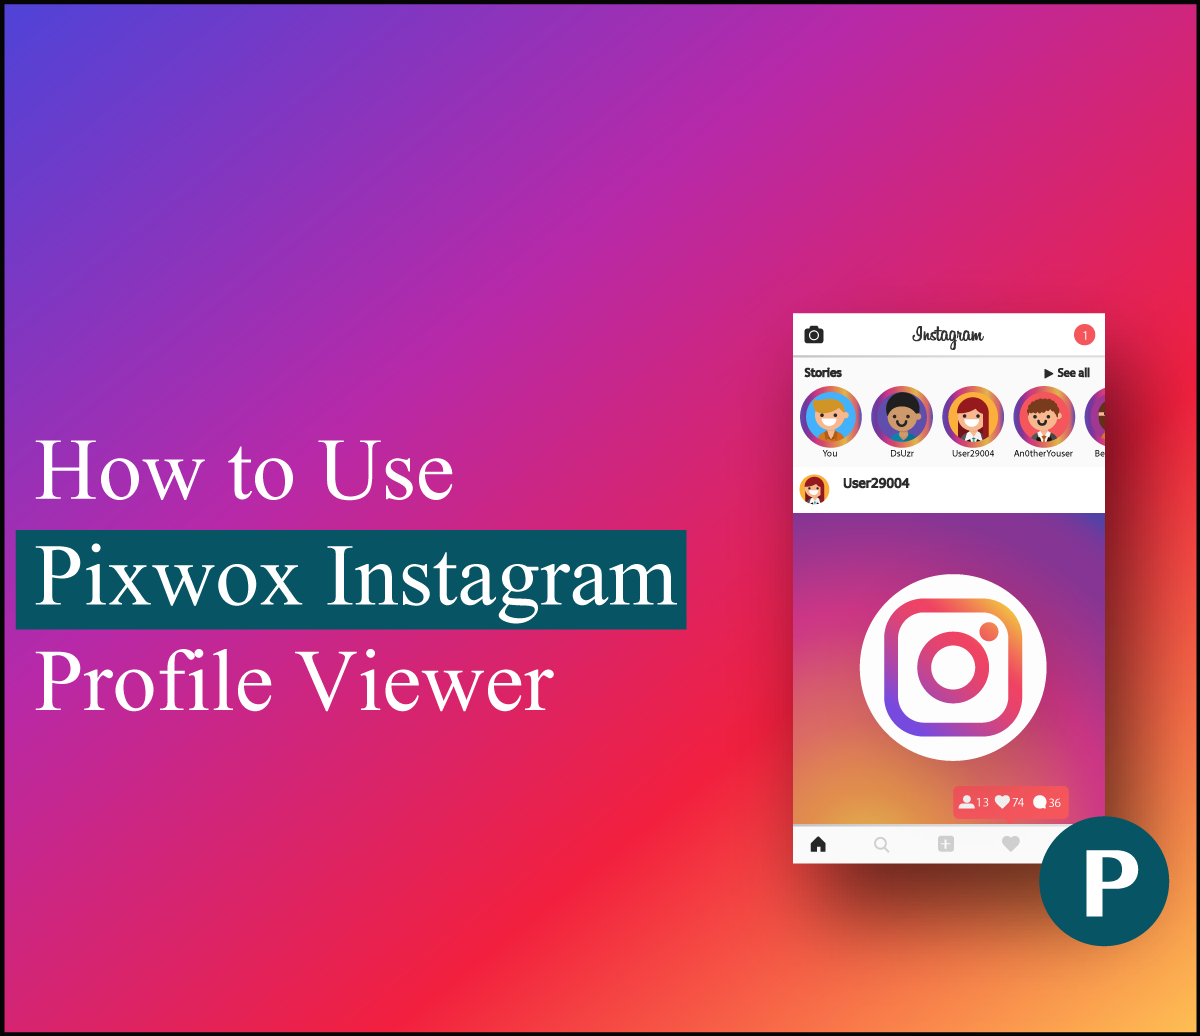 How to Use Pixwox Instagram Profile Viewer